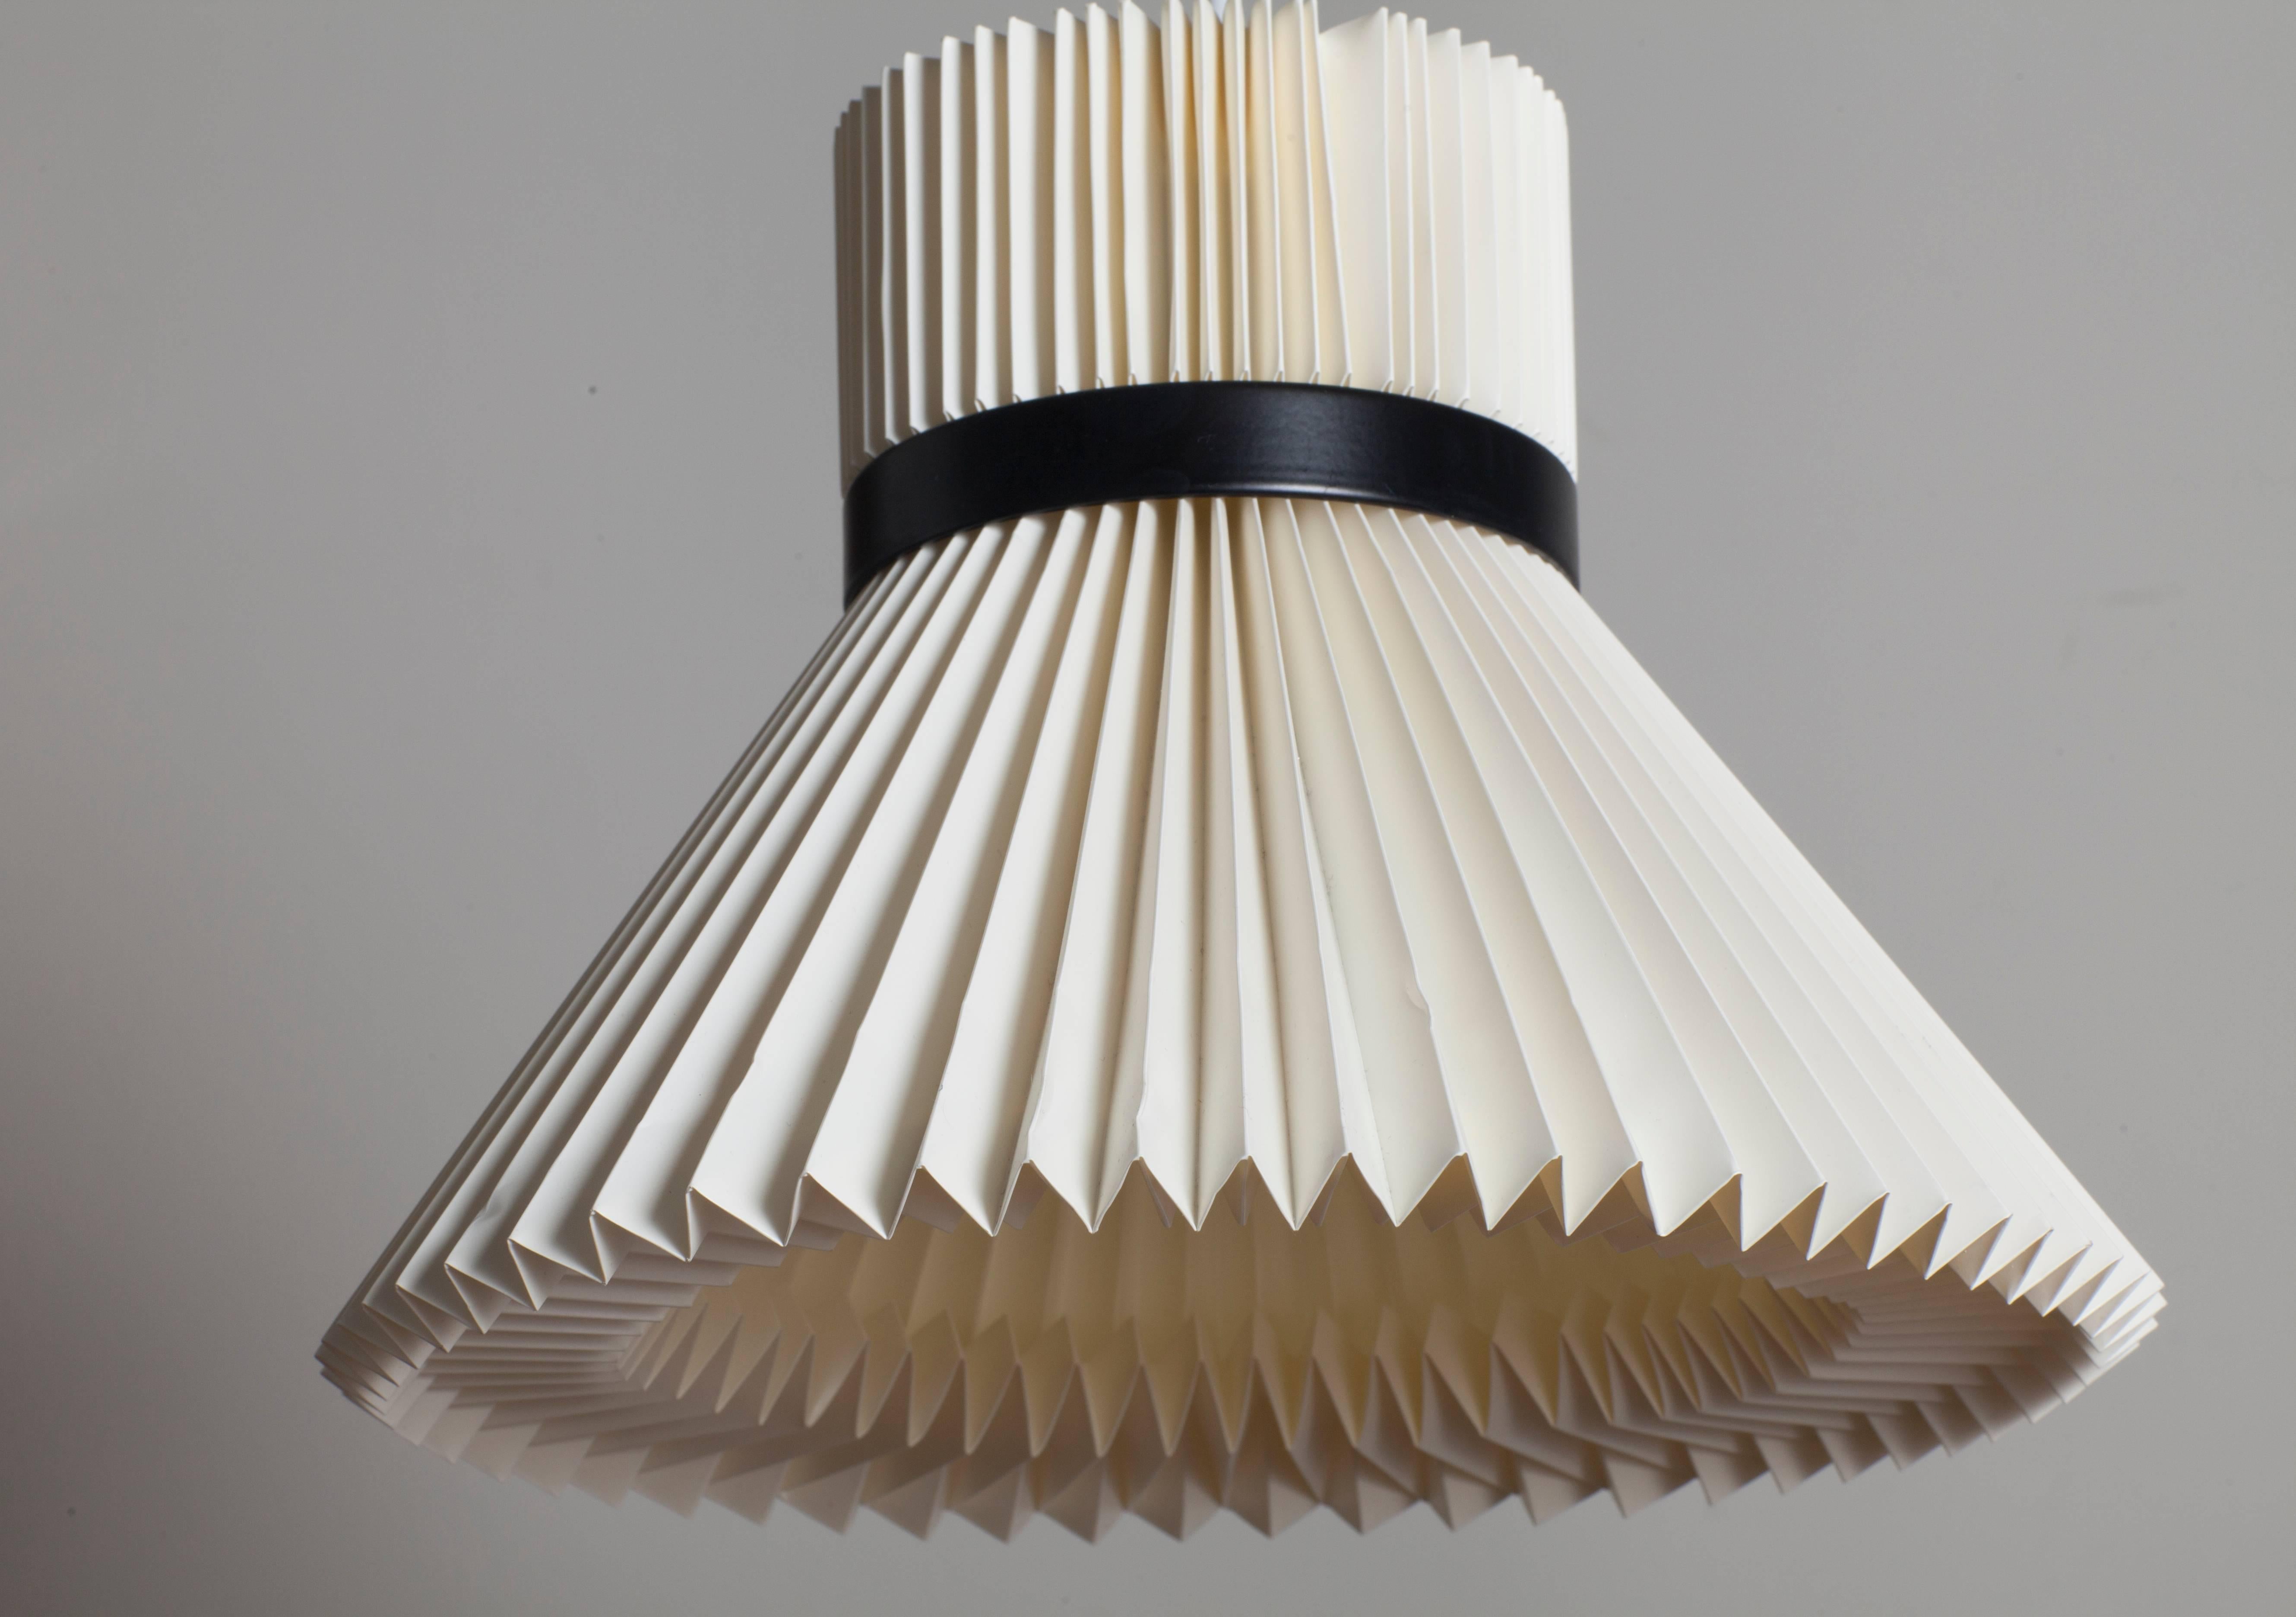 Ceiling lamp Danish classical Le Klint brand. The lamp is made of hand-molded plastic. The black rim is made of metal. The electrician is replaced. The lamp has an interesting design, well scatters the light.